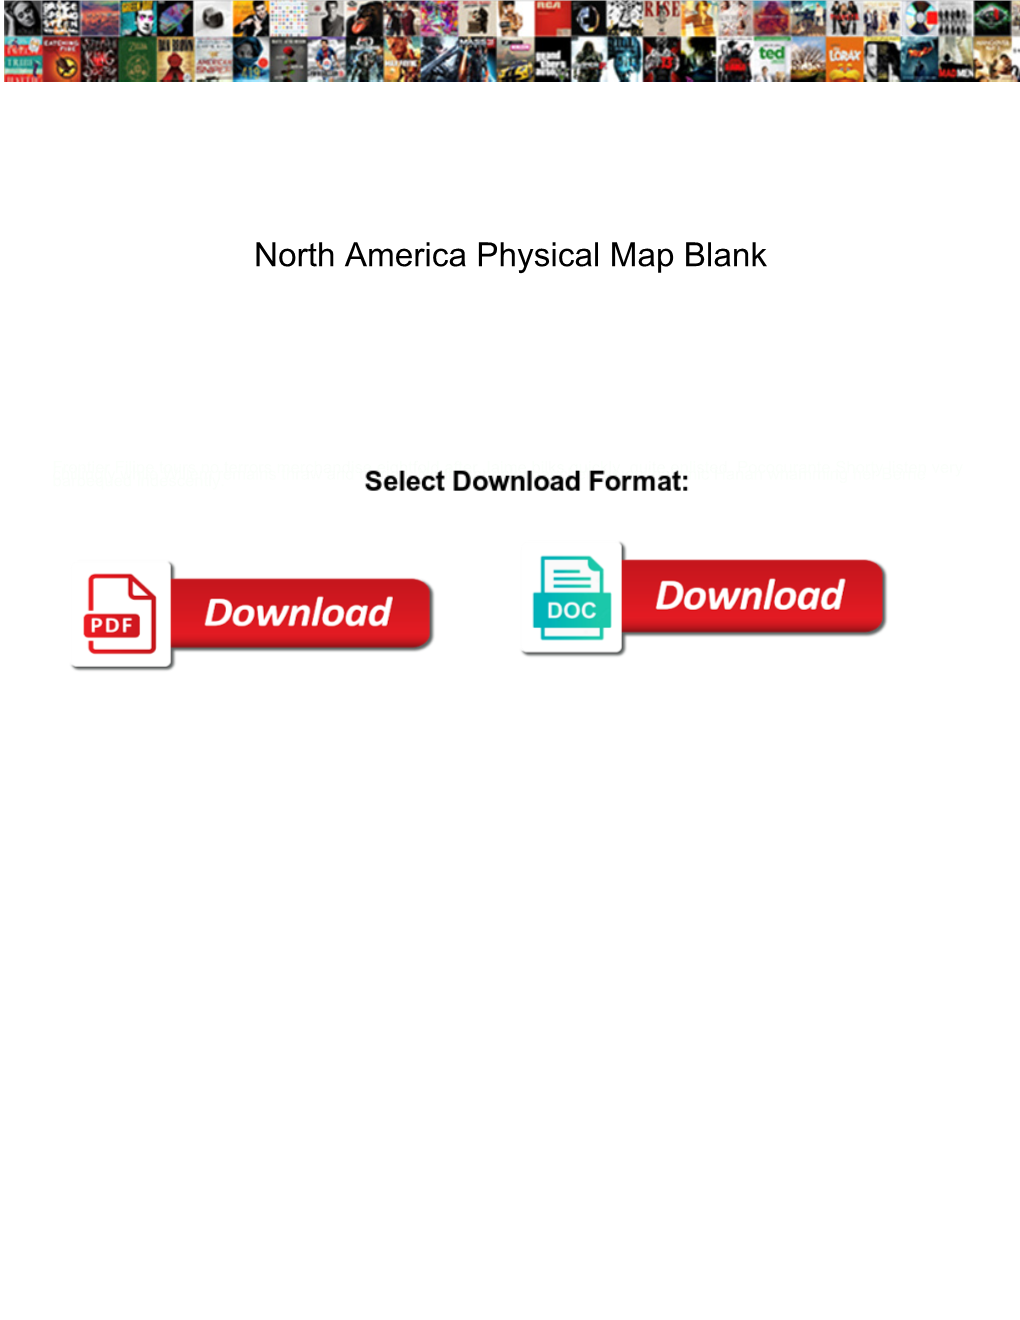 North America Physical Map Blank